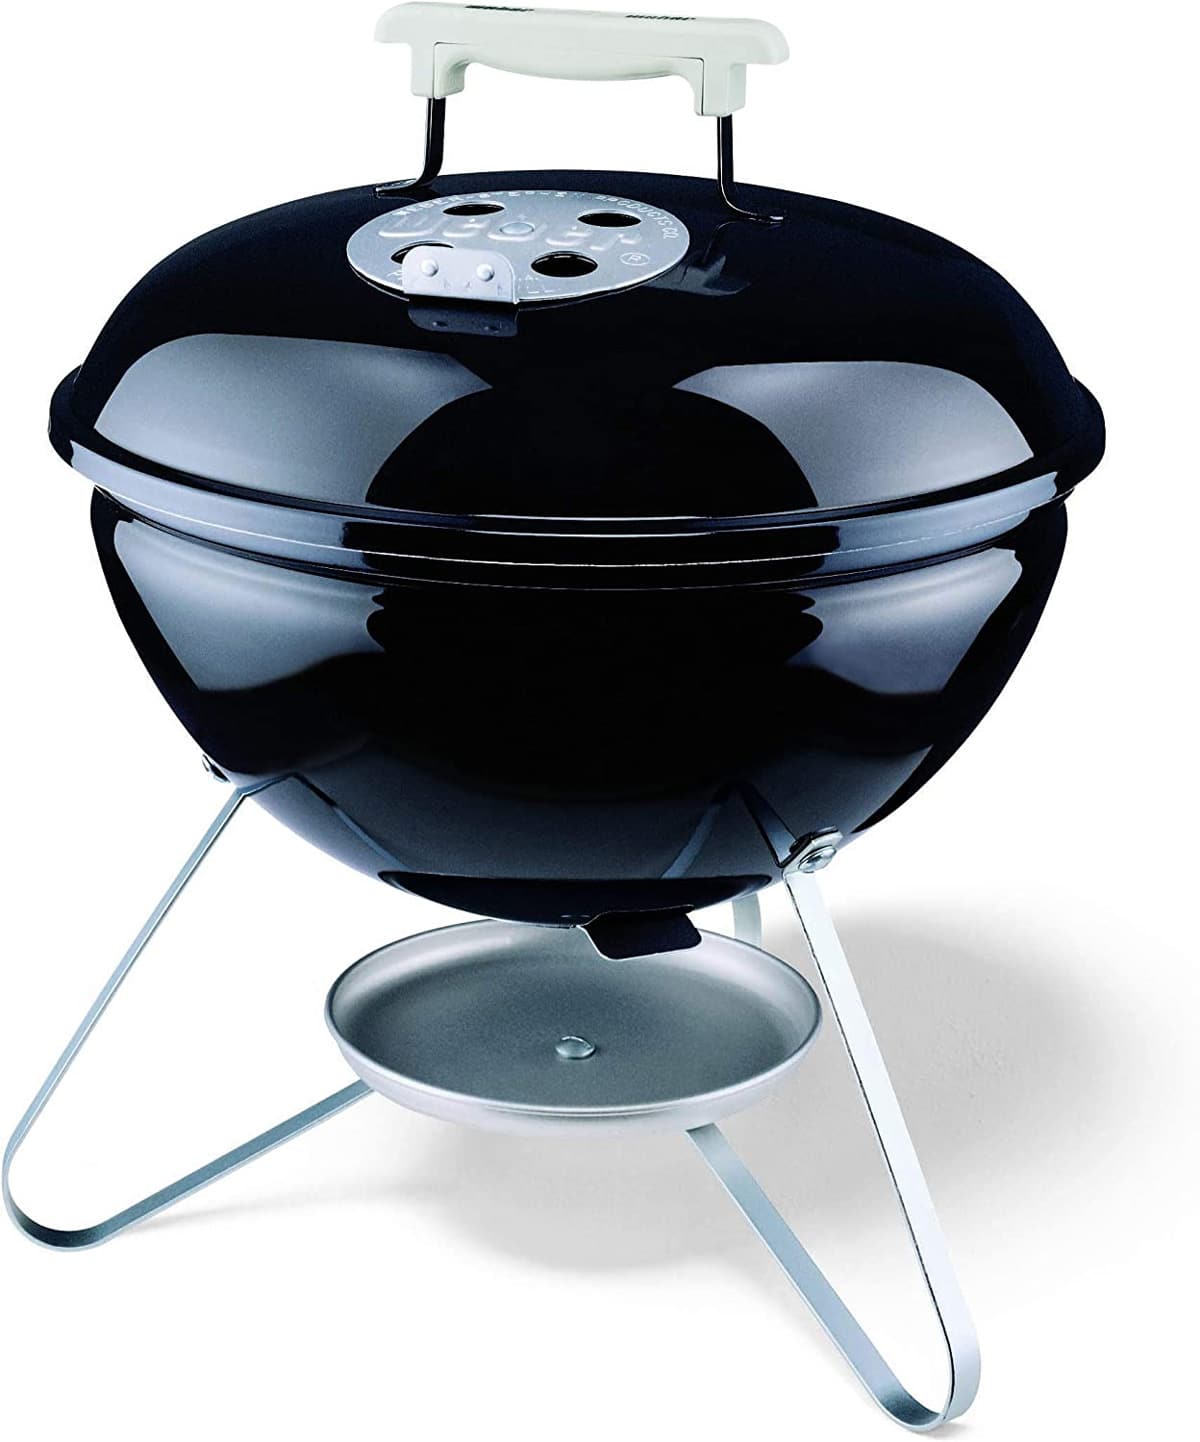 Weber Portable Grills Review